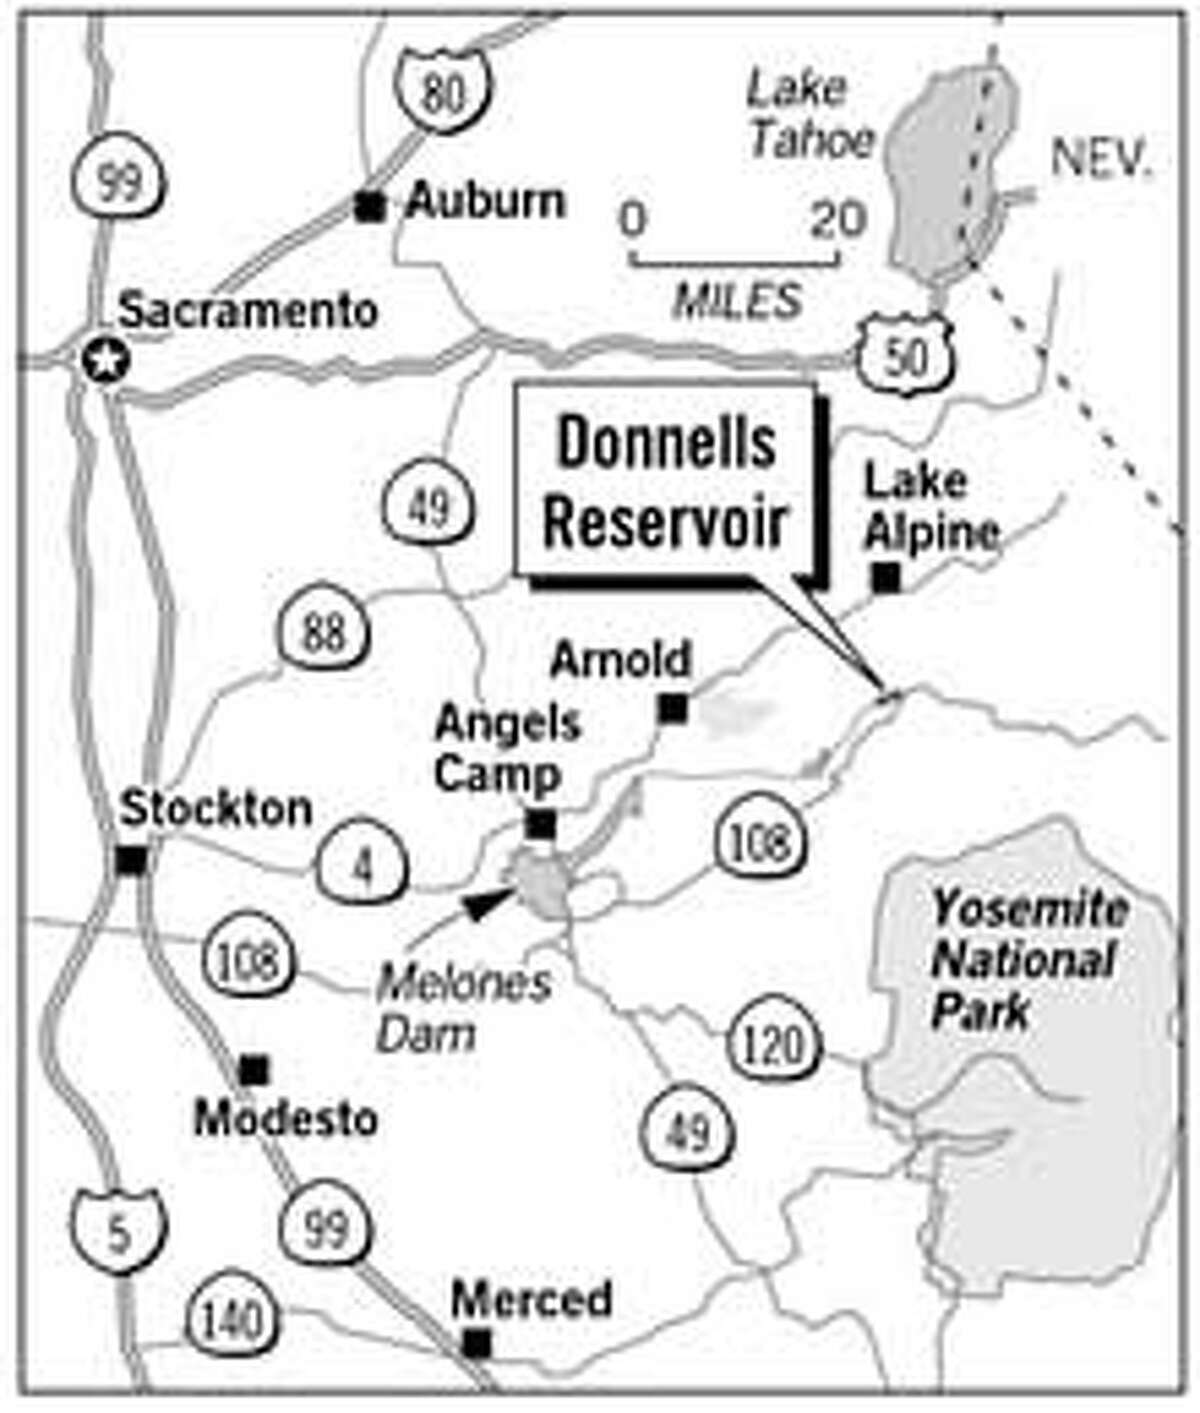 Donnells Reservoir. Chronicle Graphic